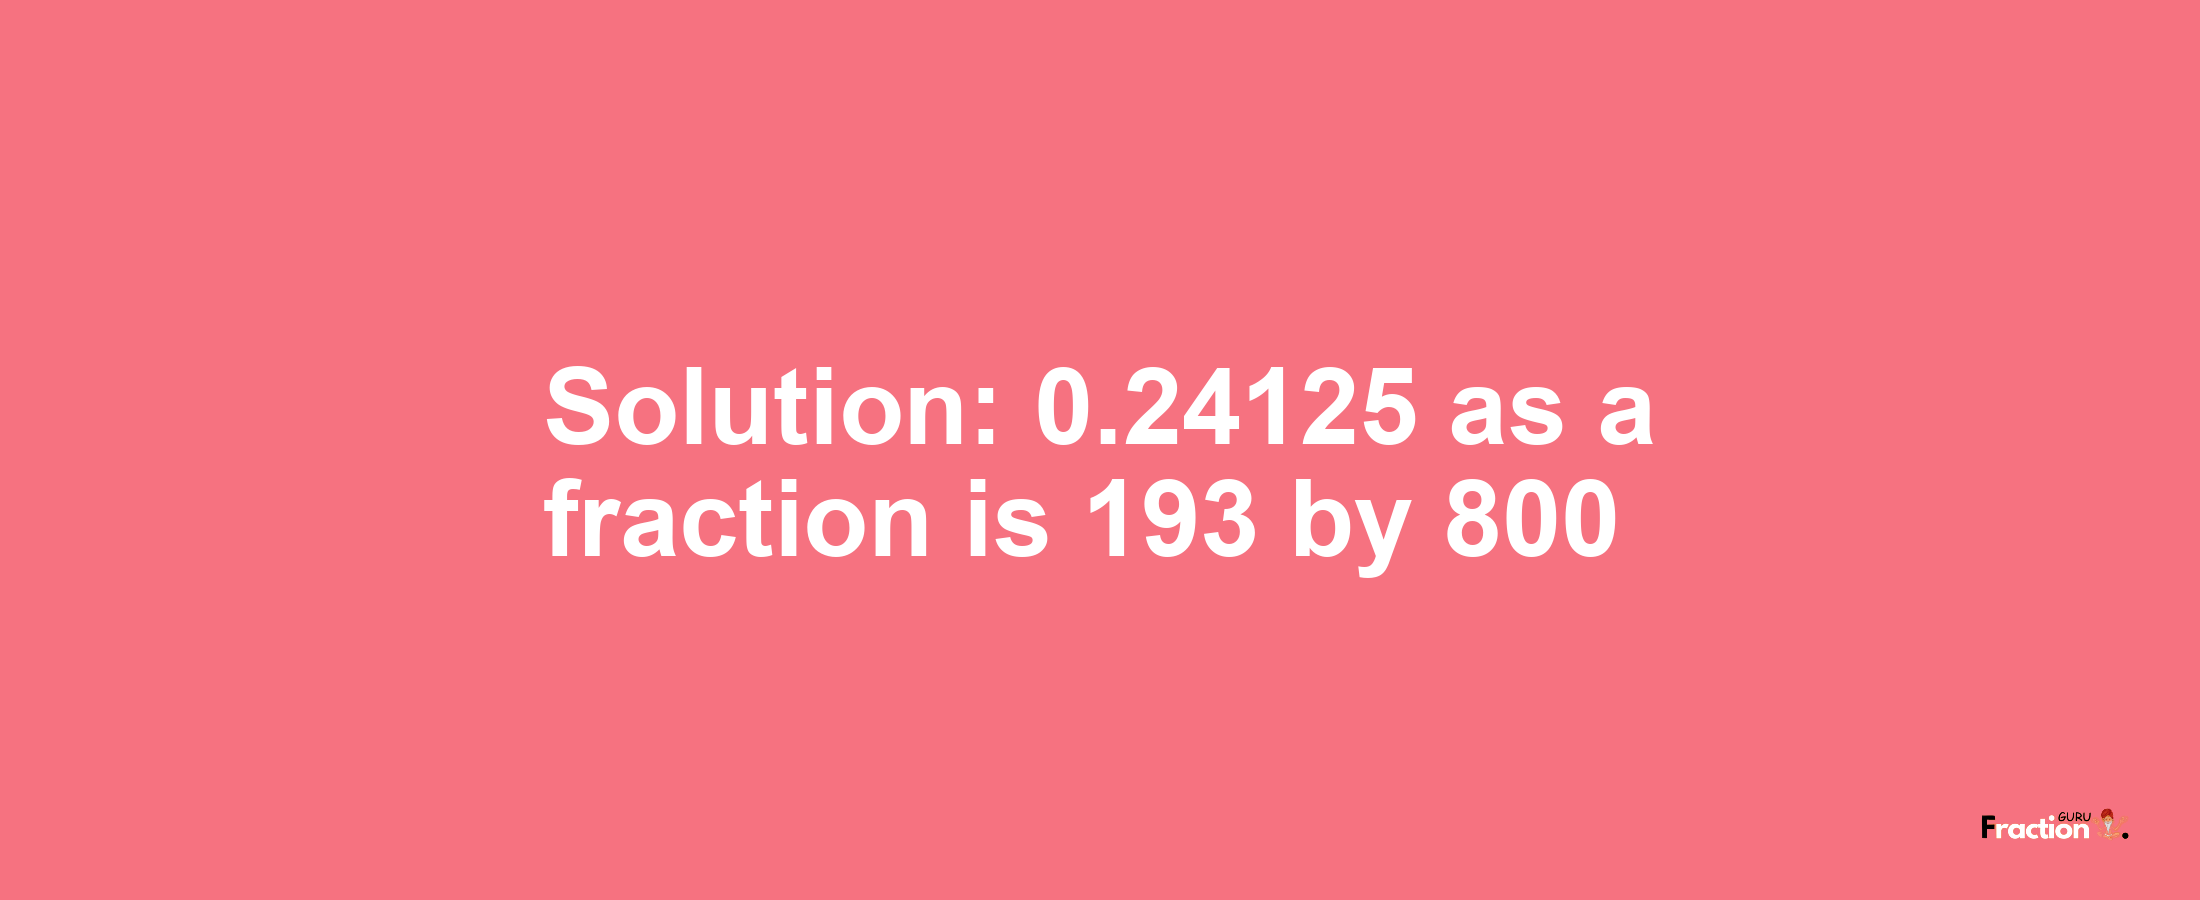 Solution:0.24125 as a fraction is 193/800